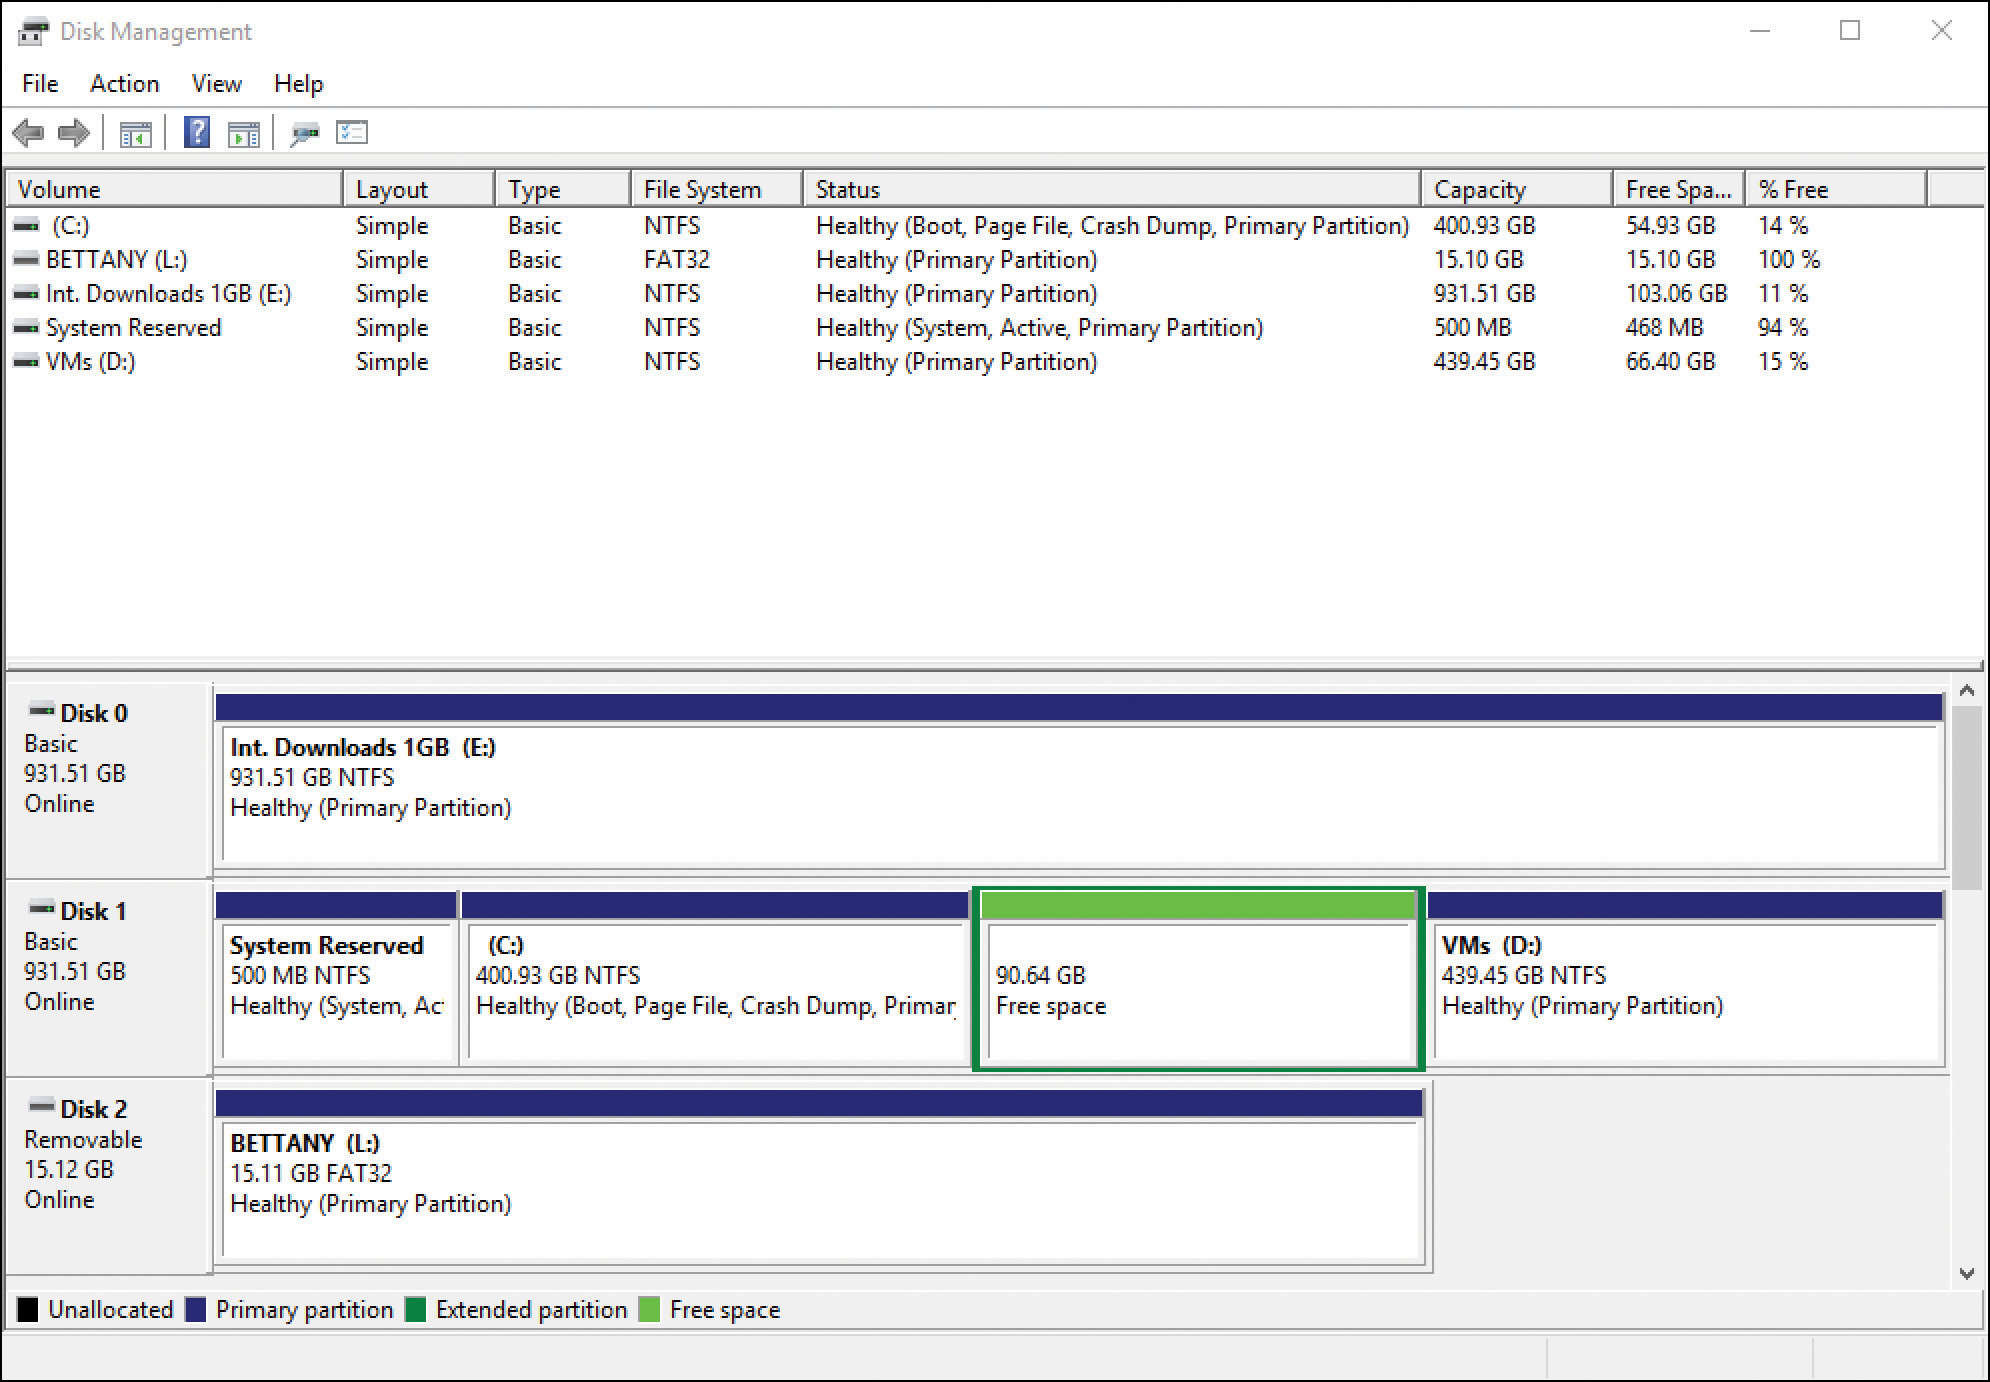 A screenshot shows the Disk Management console. In the top half of the screen are five disk volumes listed in a table showing volume name, layout, type, file system, status, capacity, free space, and percentage of disk free for each volume. In the bottom half of the screen is a scroll pane with graphical display of each disk and the volumes on each.